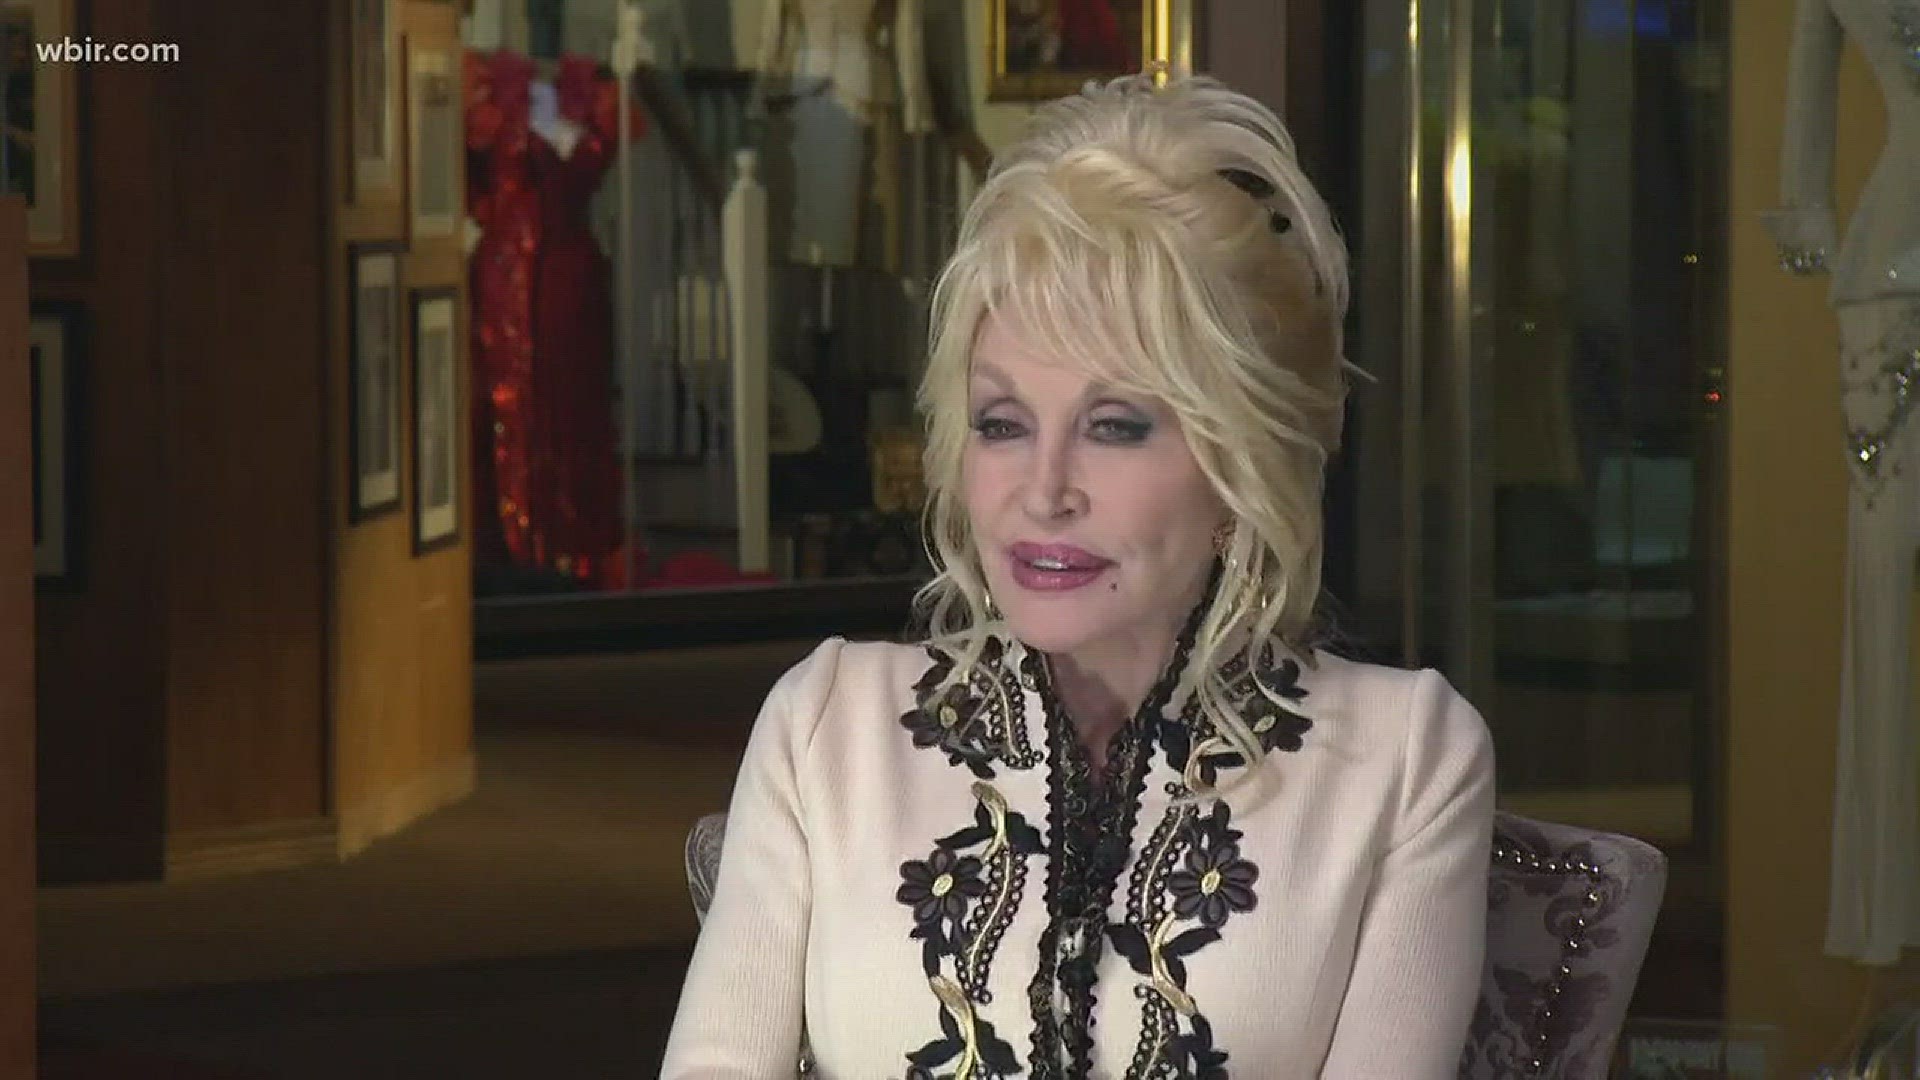 Dolly Parton says they are still working on the script for the movie based on one of her favorite songs, but it's not perfect yet and she's picky.